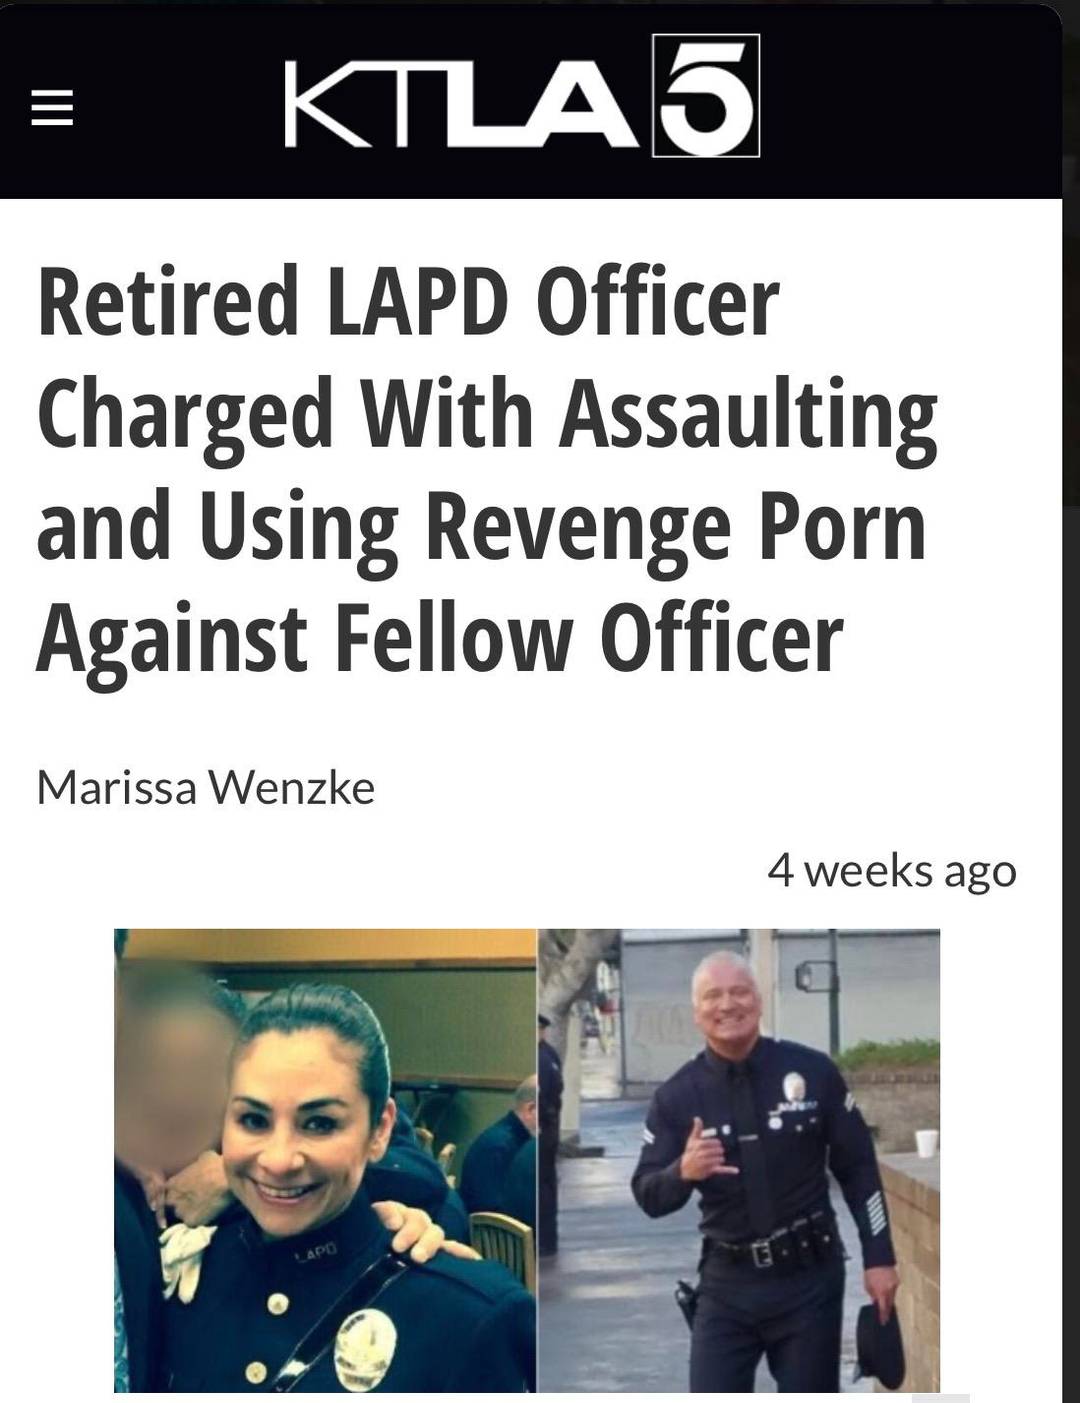 Male cop exposed female cop with revenge porn | Scrolller